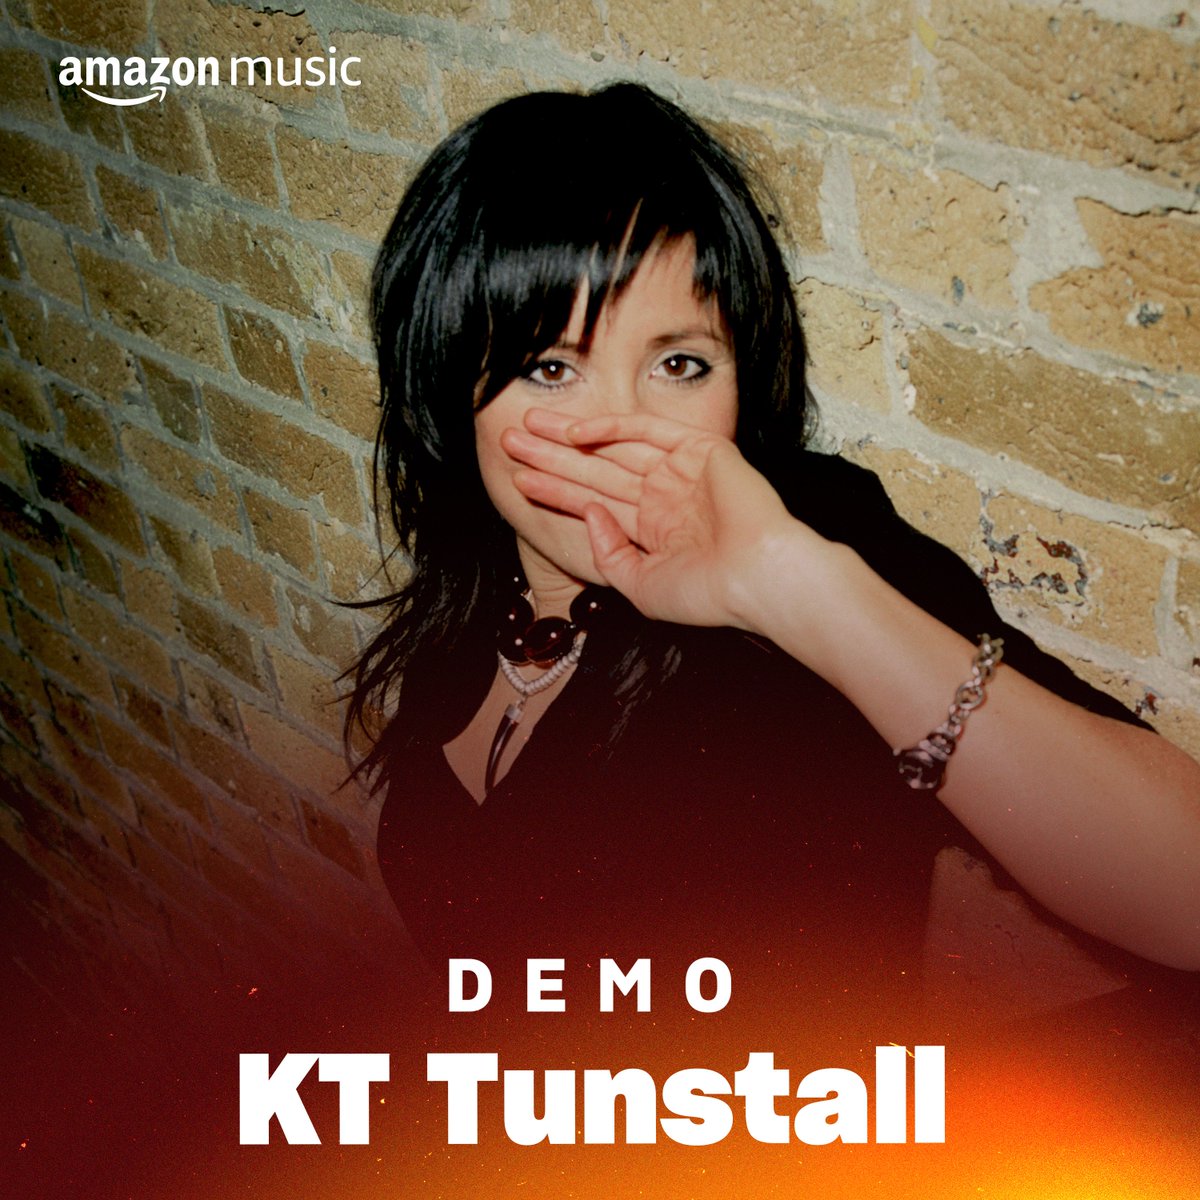 🏆✨ @KTTunstall to receive Ivor Novello Award for Outstanding Song Collection with @PRSforMusic✨🏆 A celebration of KT's creativity and songwriting throughout a prolific 20-year career! 🎉 'My relationship with the Ivor Novello Awards began 18 years ago in 2006, with